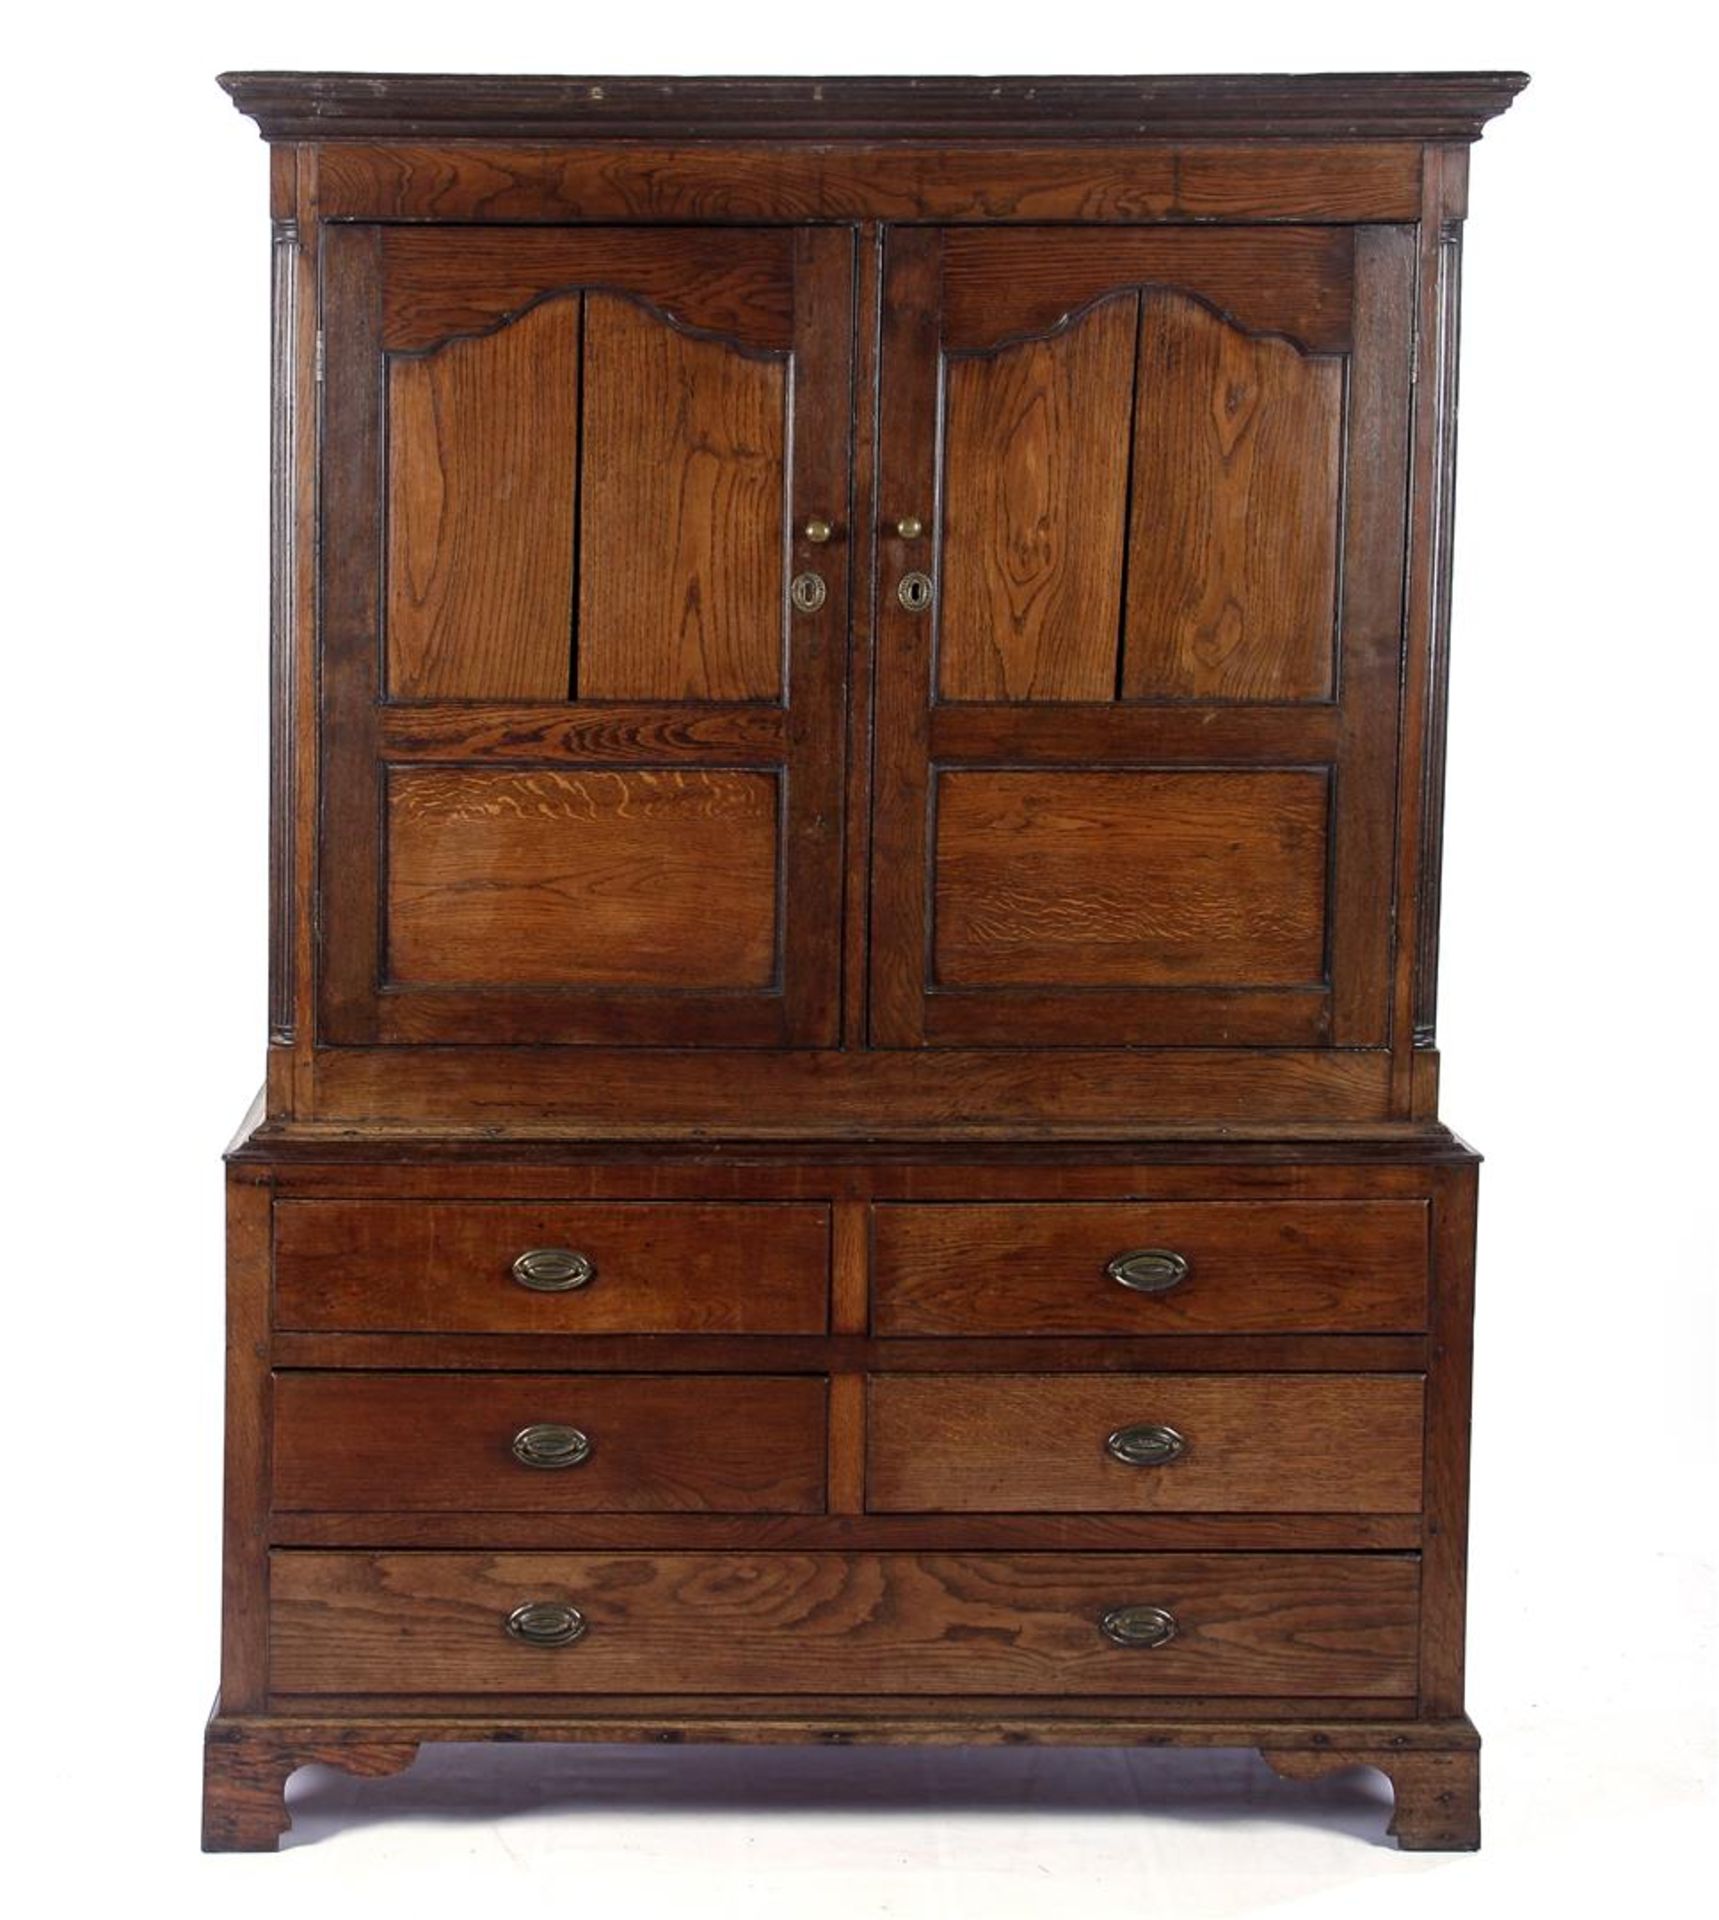 Oak 2-part cabinet with 2 doors in top cabinet and 5 drawers in base cabinet 194.5 cm high, 129 cm